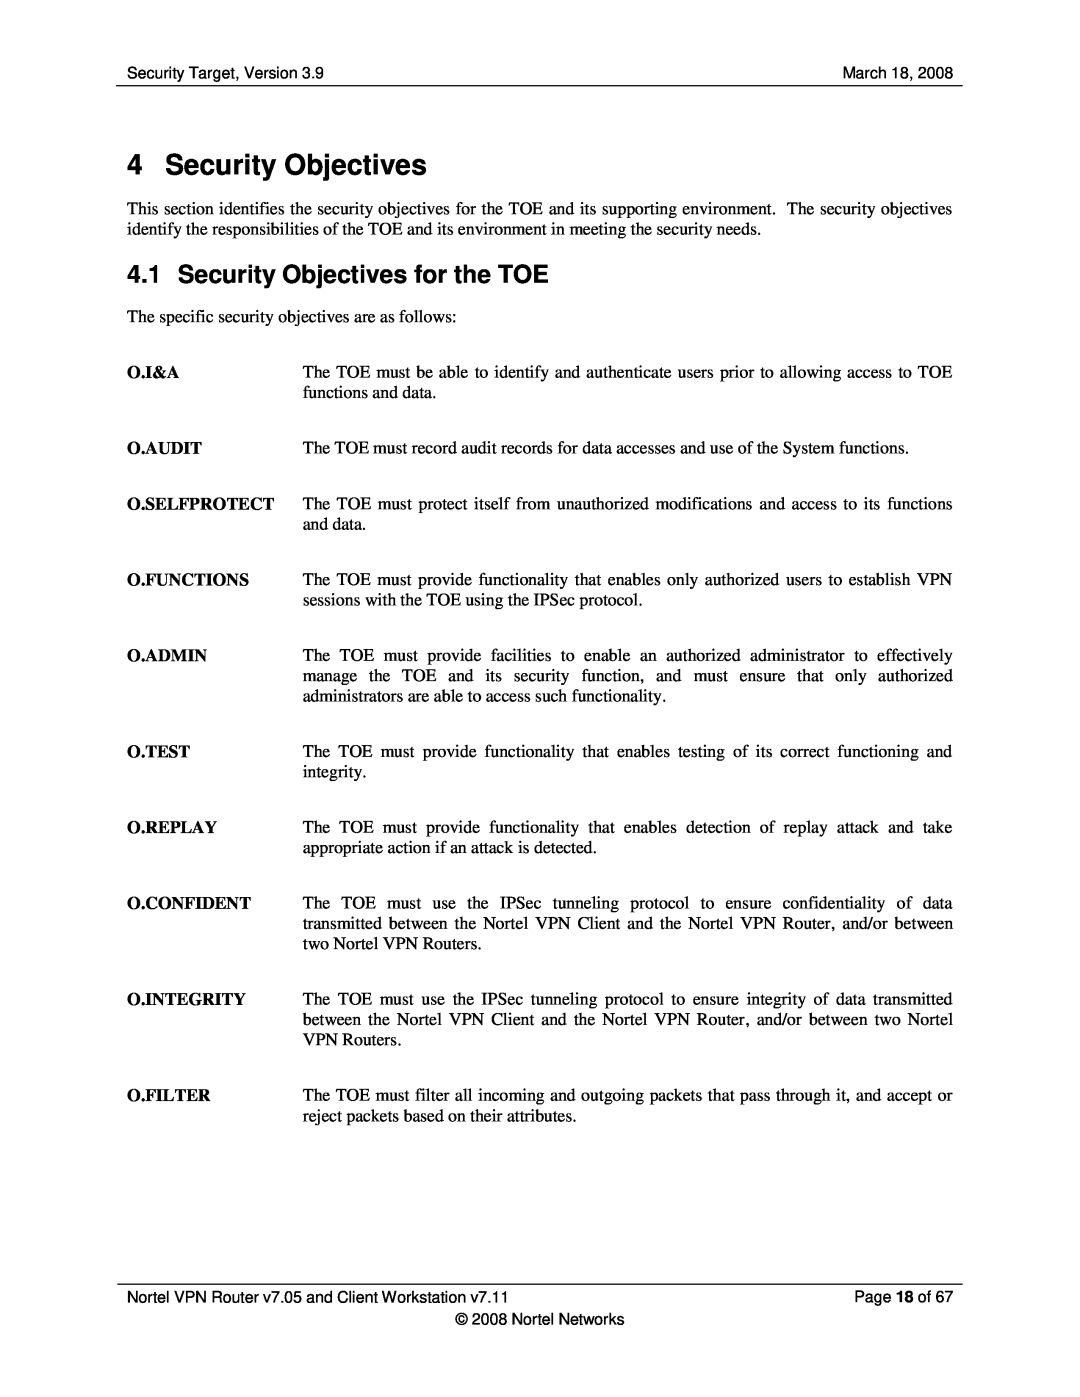 Nortel Networks 7.05, 7.11 manual Security Objectives for the TOE 